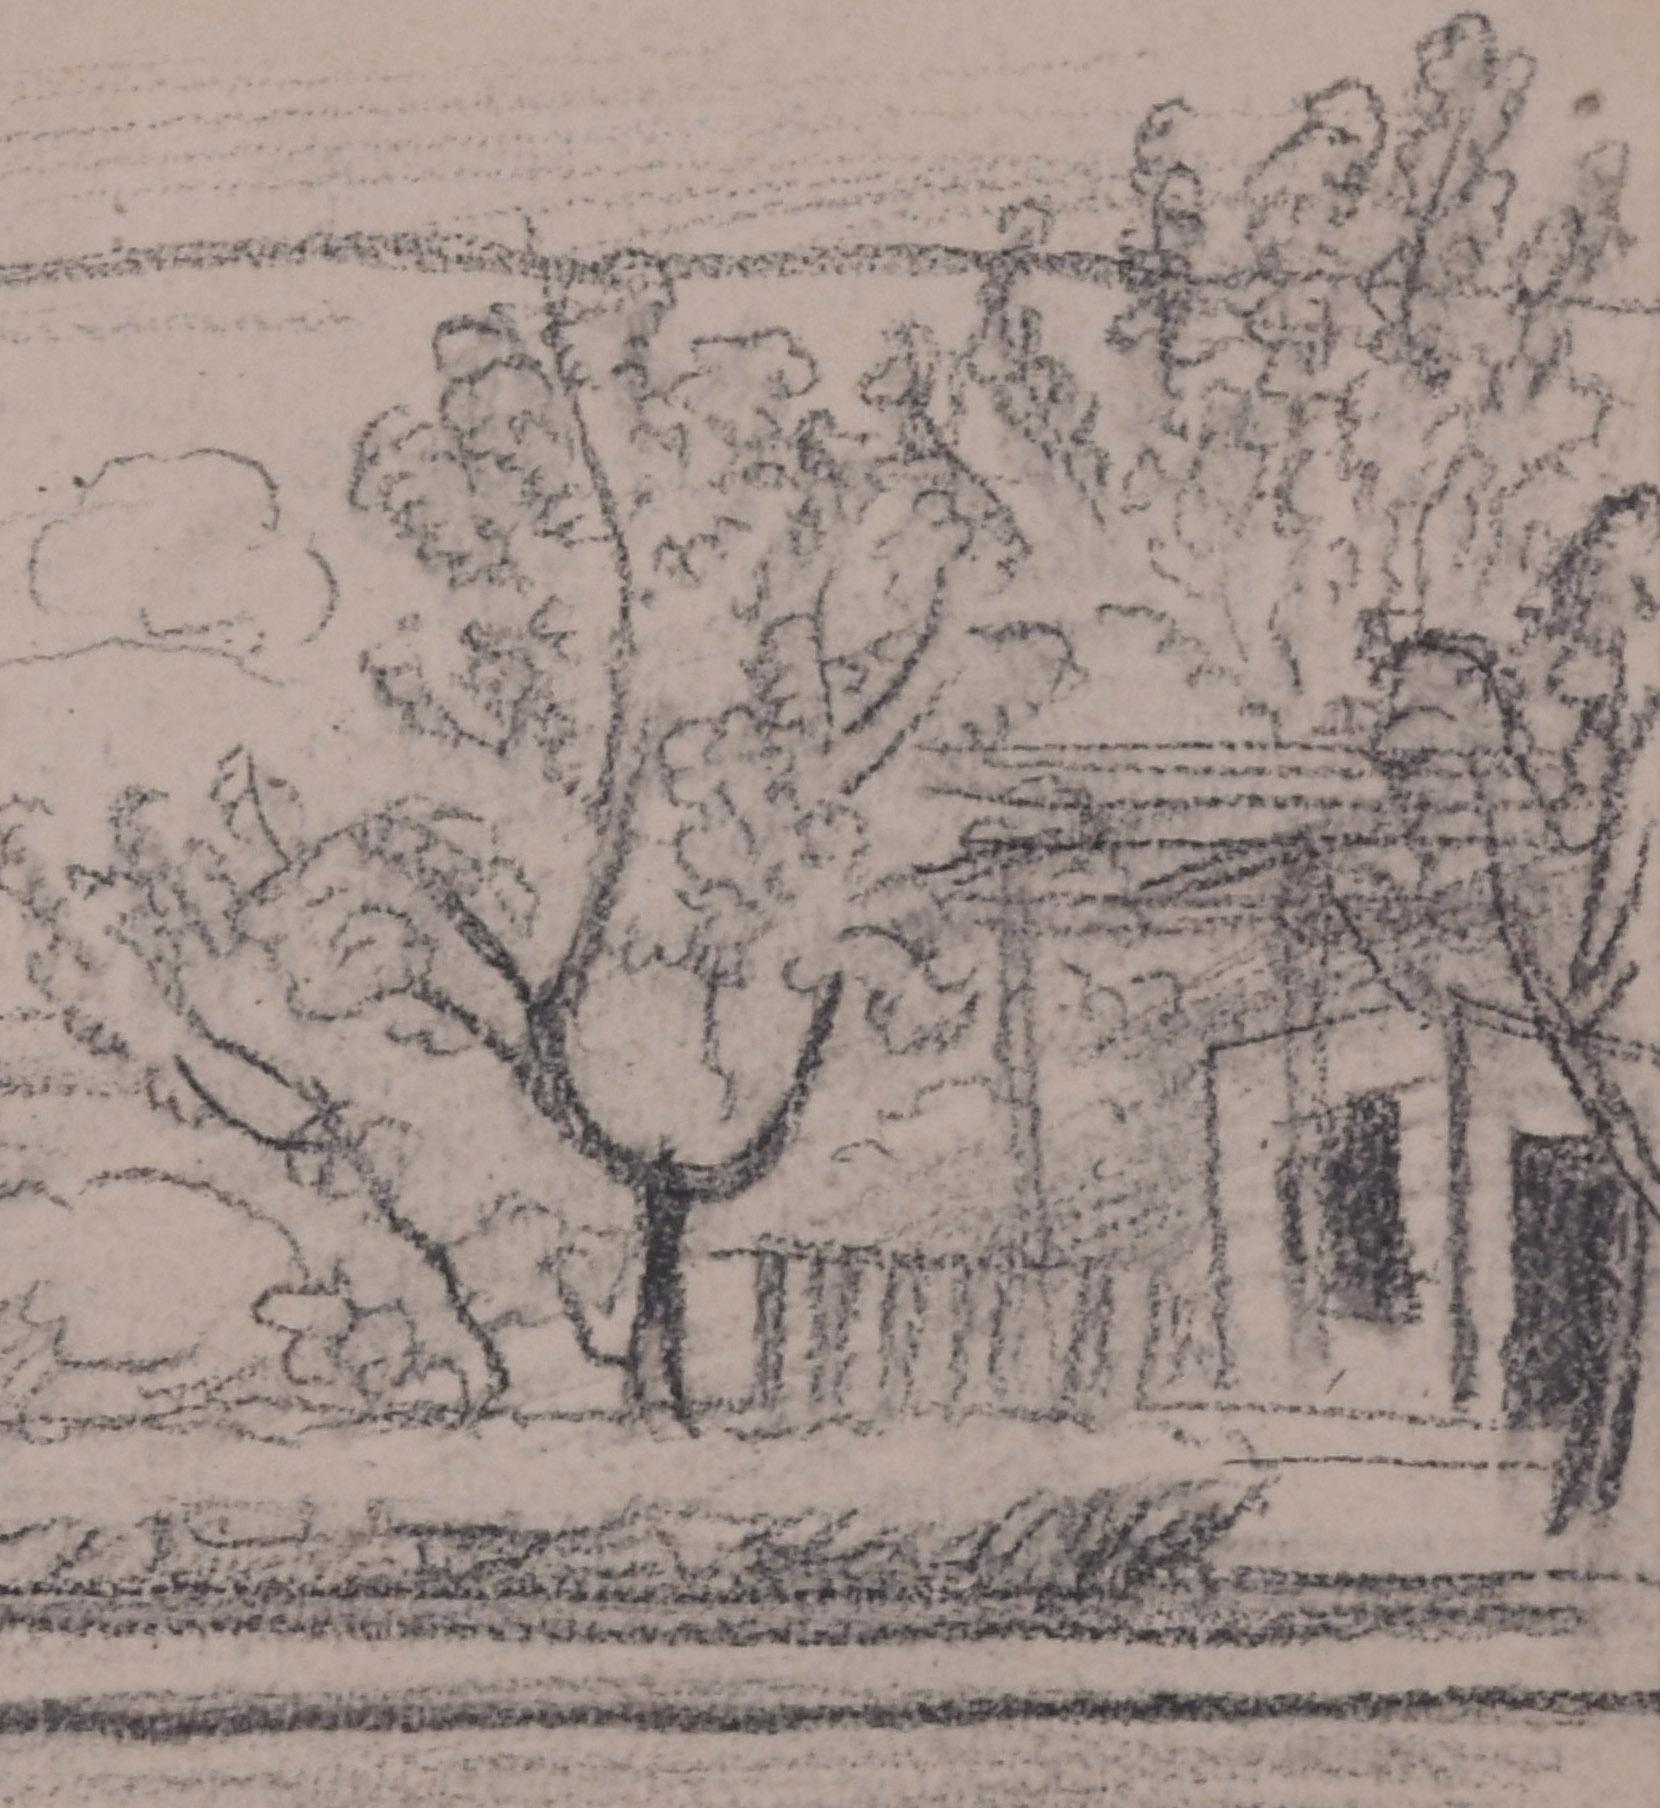 Brookdale, New Jersey
Graphite on paper, 1922
Signed with the artist's initials l.l., and dated 1922 (see photo)
Annotated 